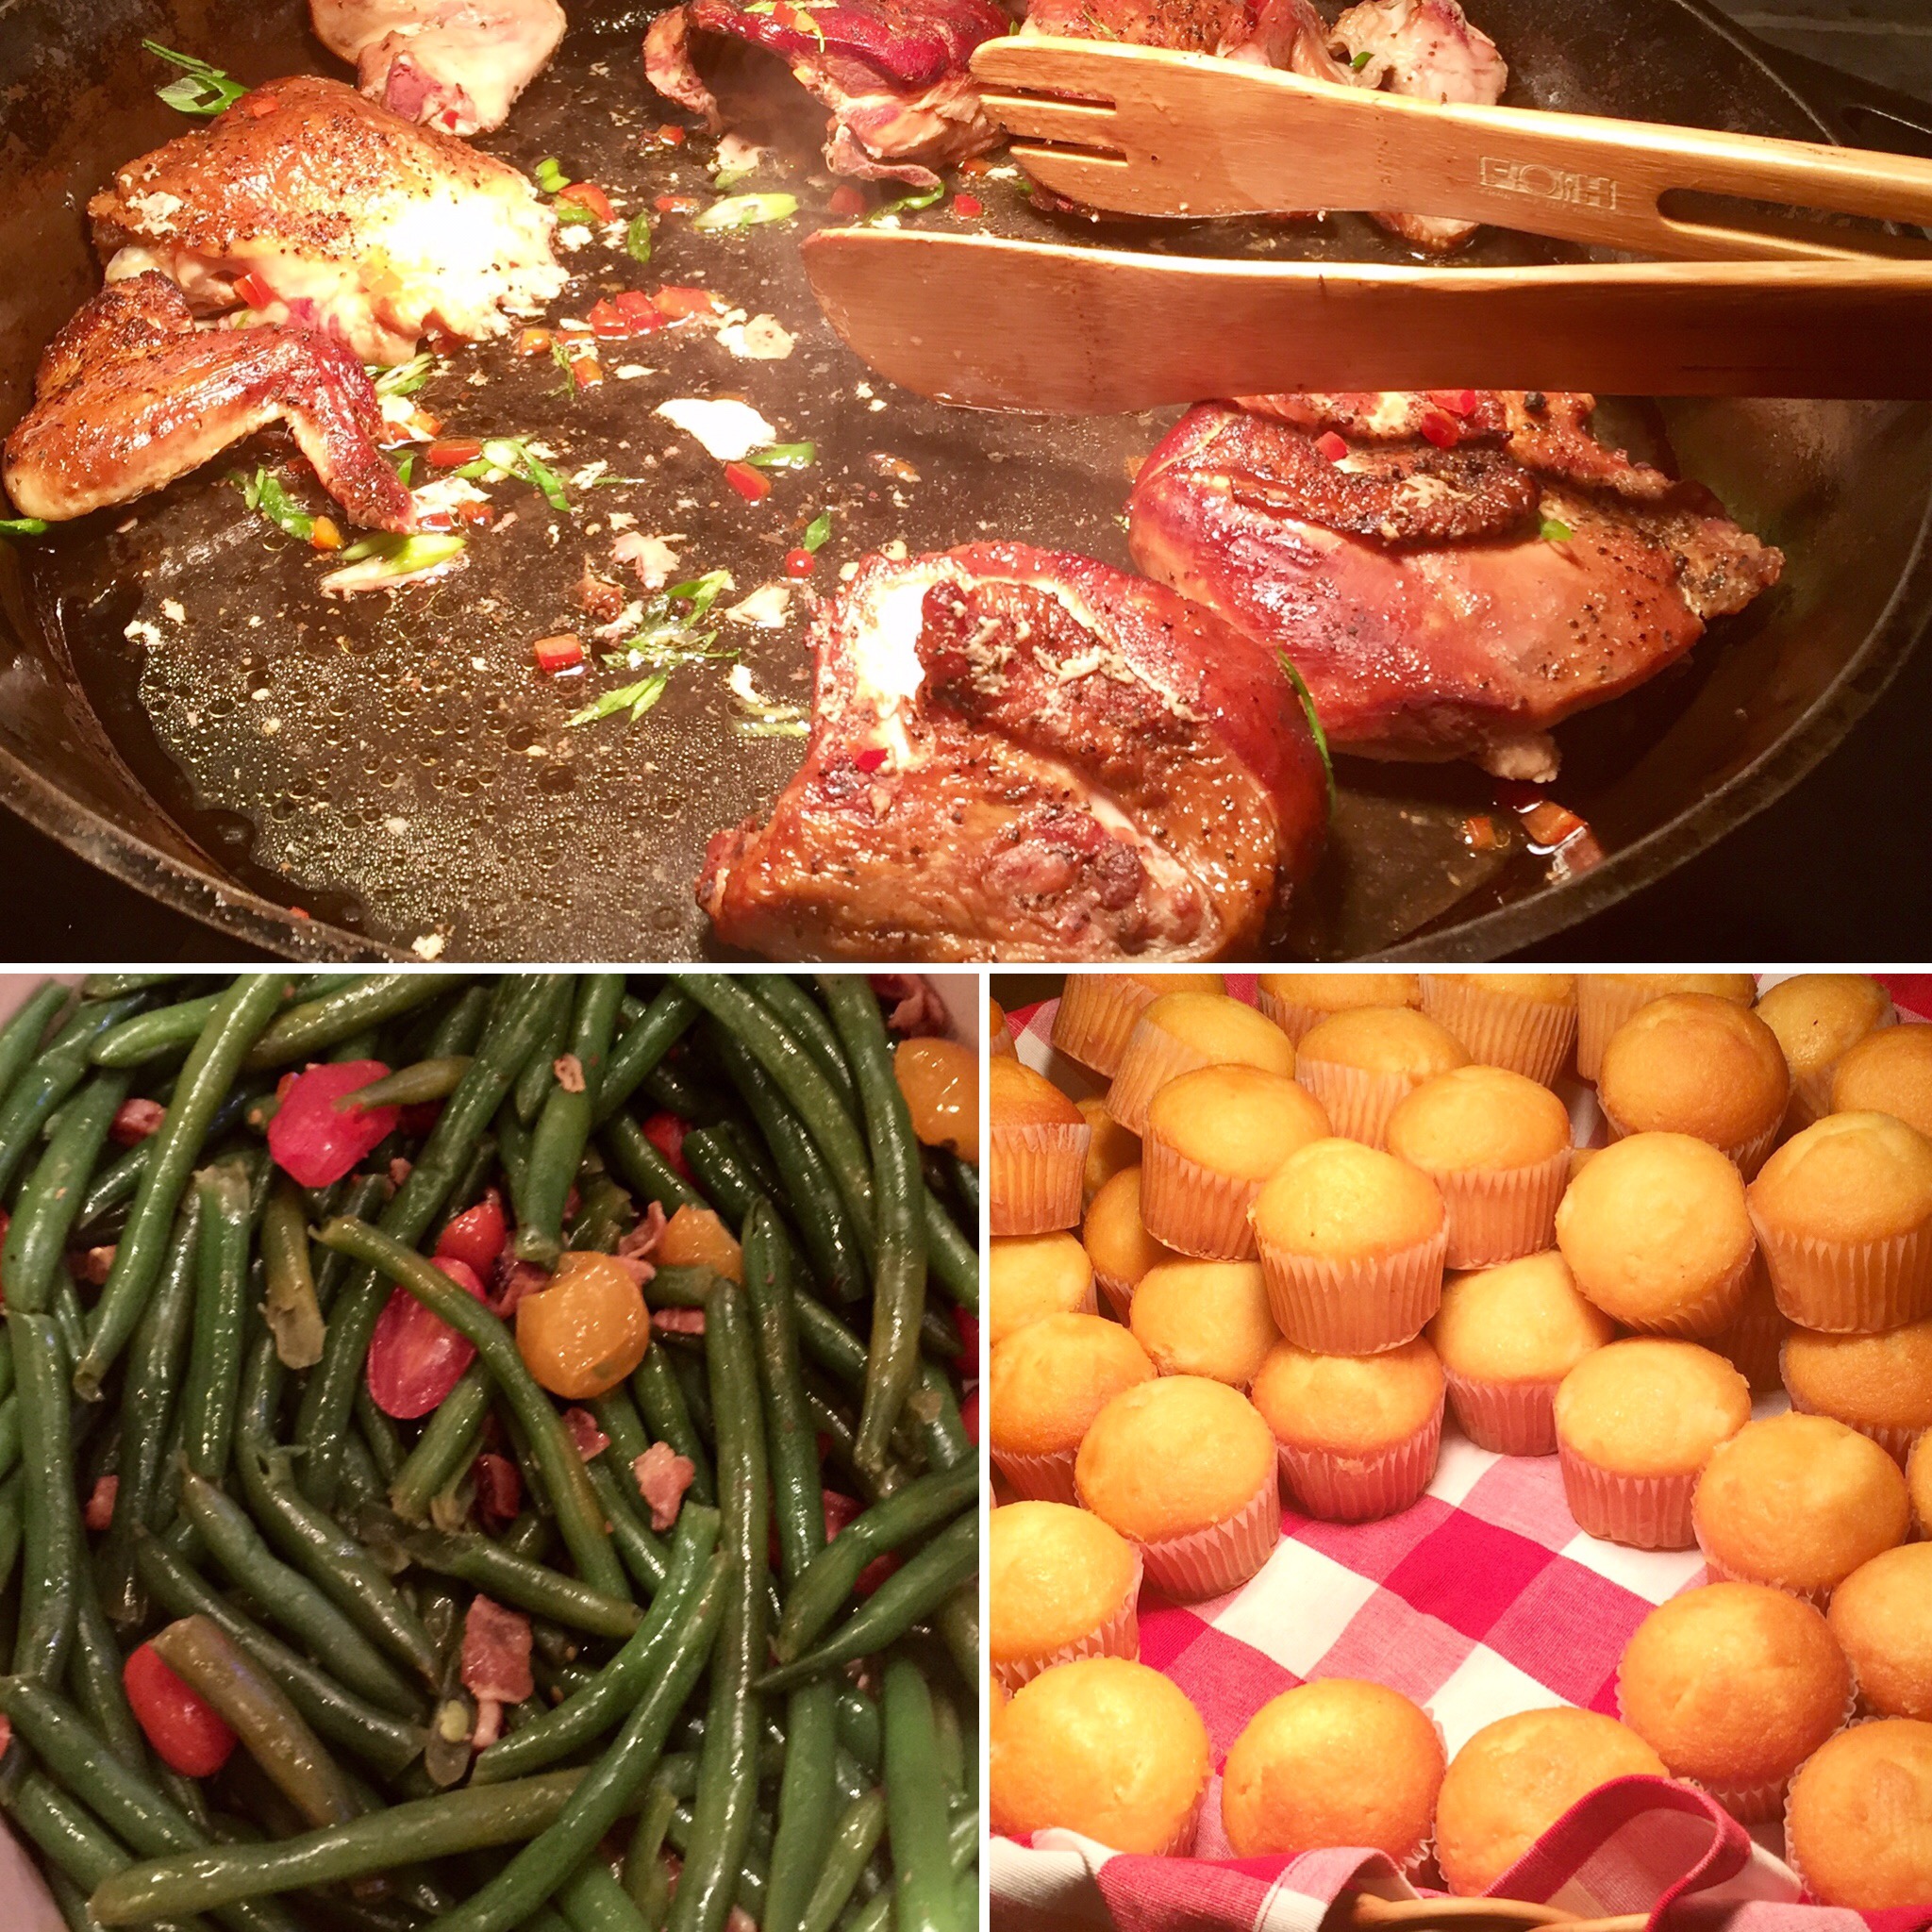 Roast chicken, green beans with bacon, and corn bread